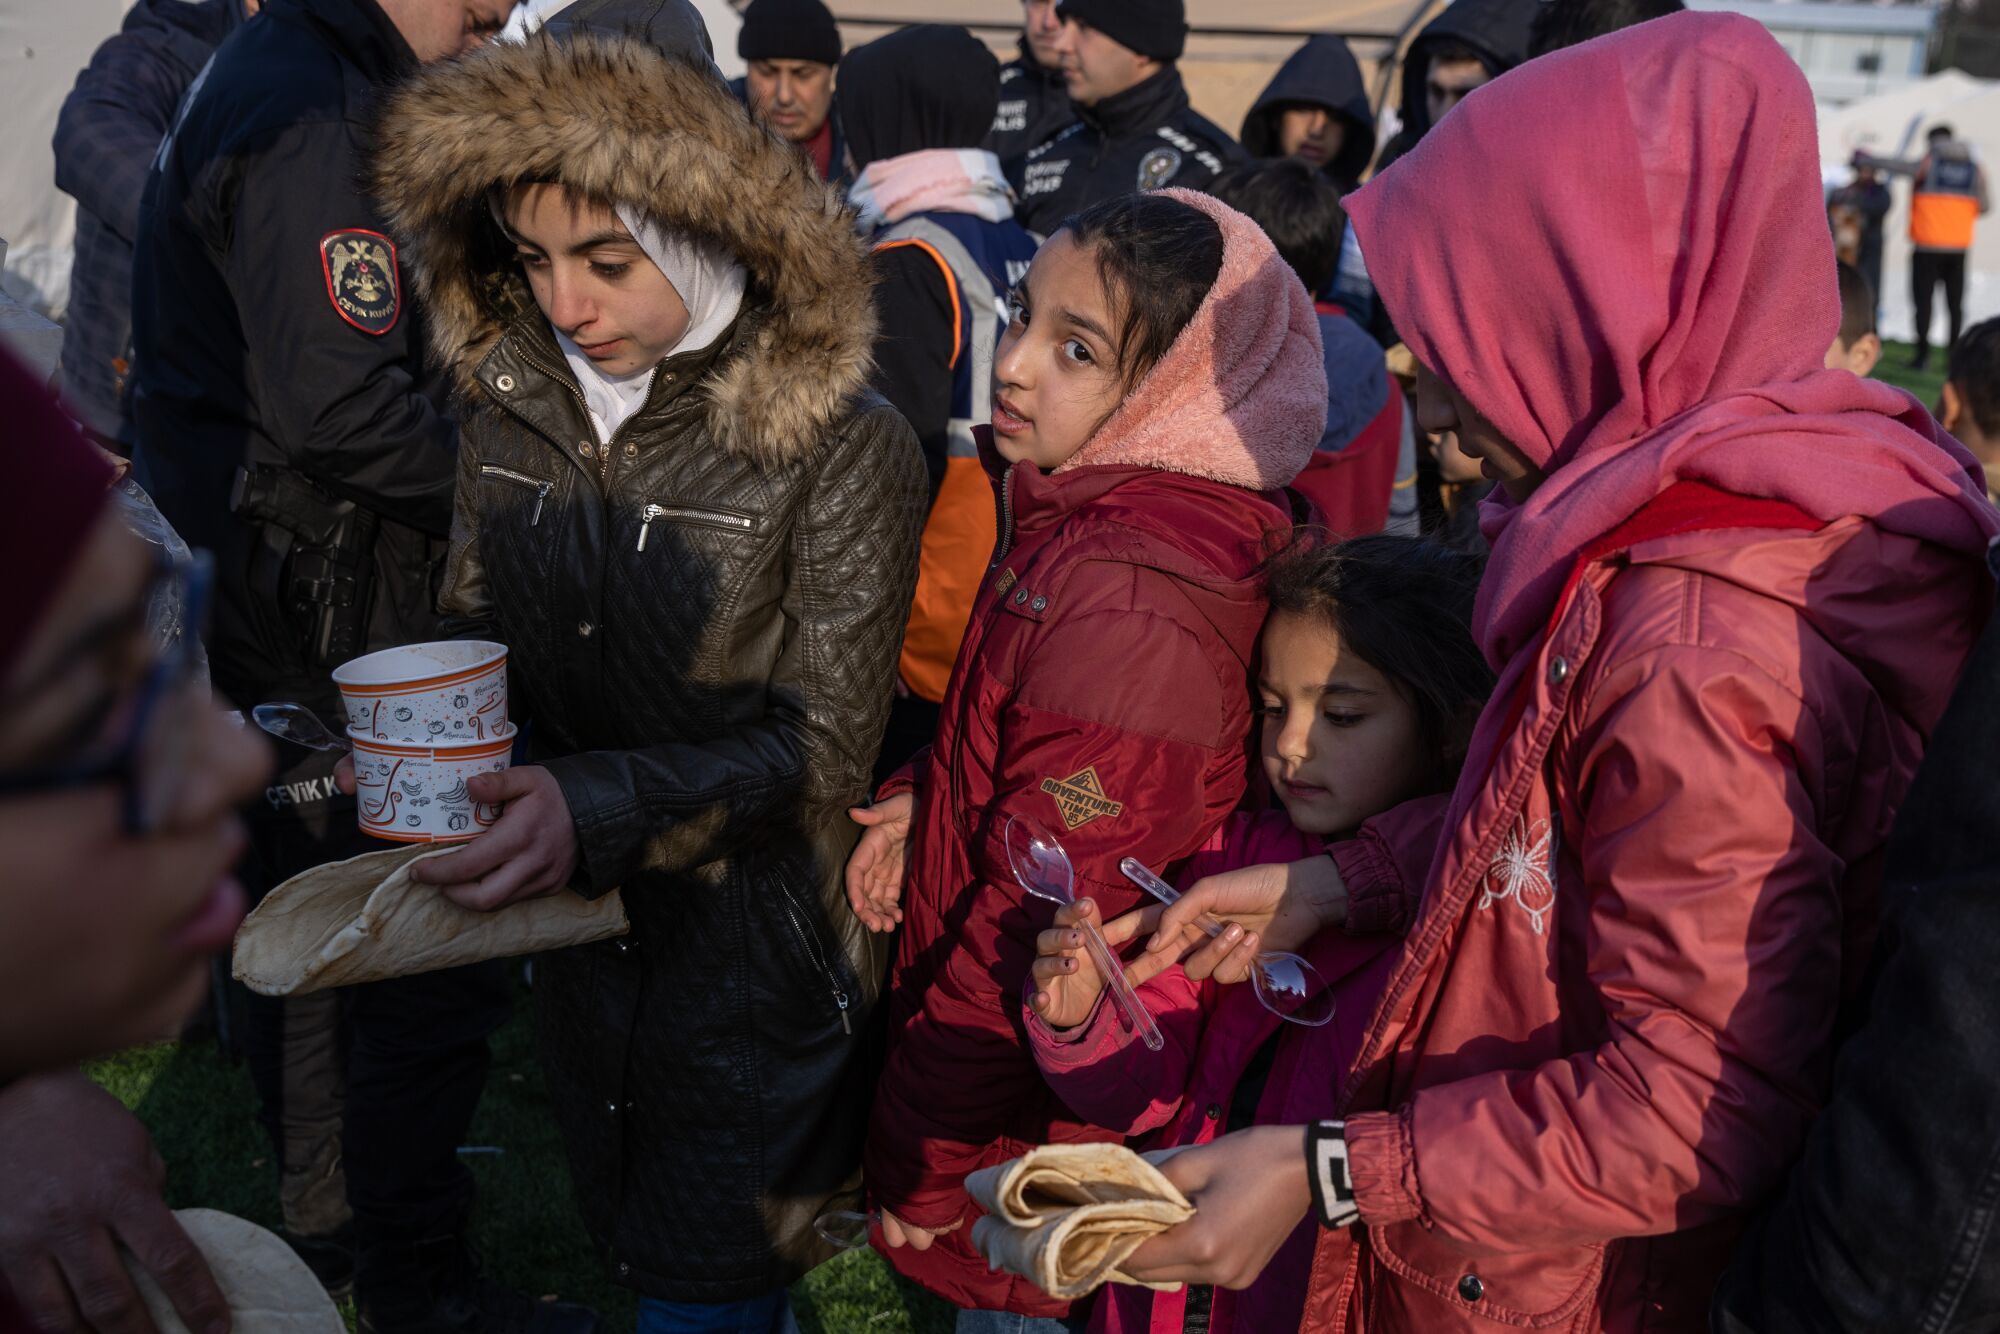 Displaced Syrians gather to receive food handouts at a makeshift camp in a sports centre near Kilis, Turkey